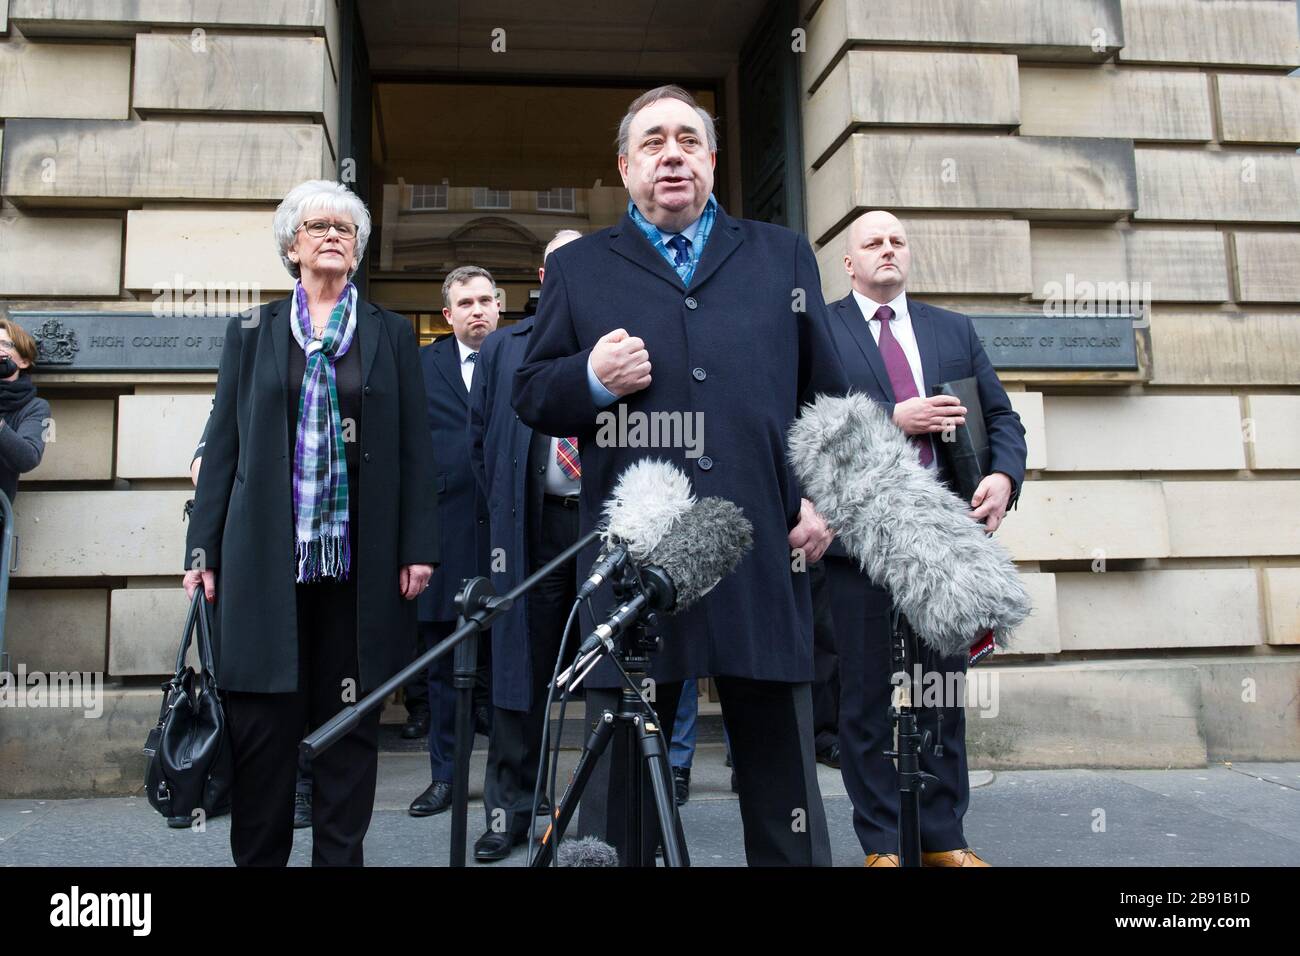 Edinburgh, UK. 23rd Mar, 2020. Pictured: Alex Salmond - Former First Minister of Scotland and Former Leader of the Scottish National Party (SNP). Alex Salmond is seen leaving the High Court as a free man on day eleven of his trial. Credit: Colin Fisher/Alamy Live News Stock Photo